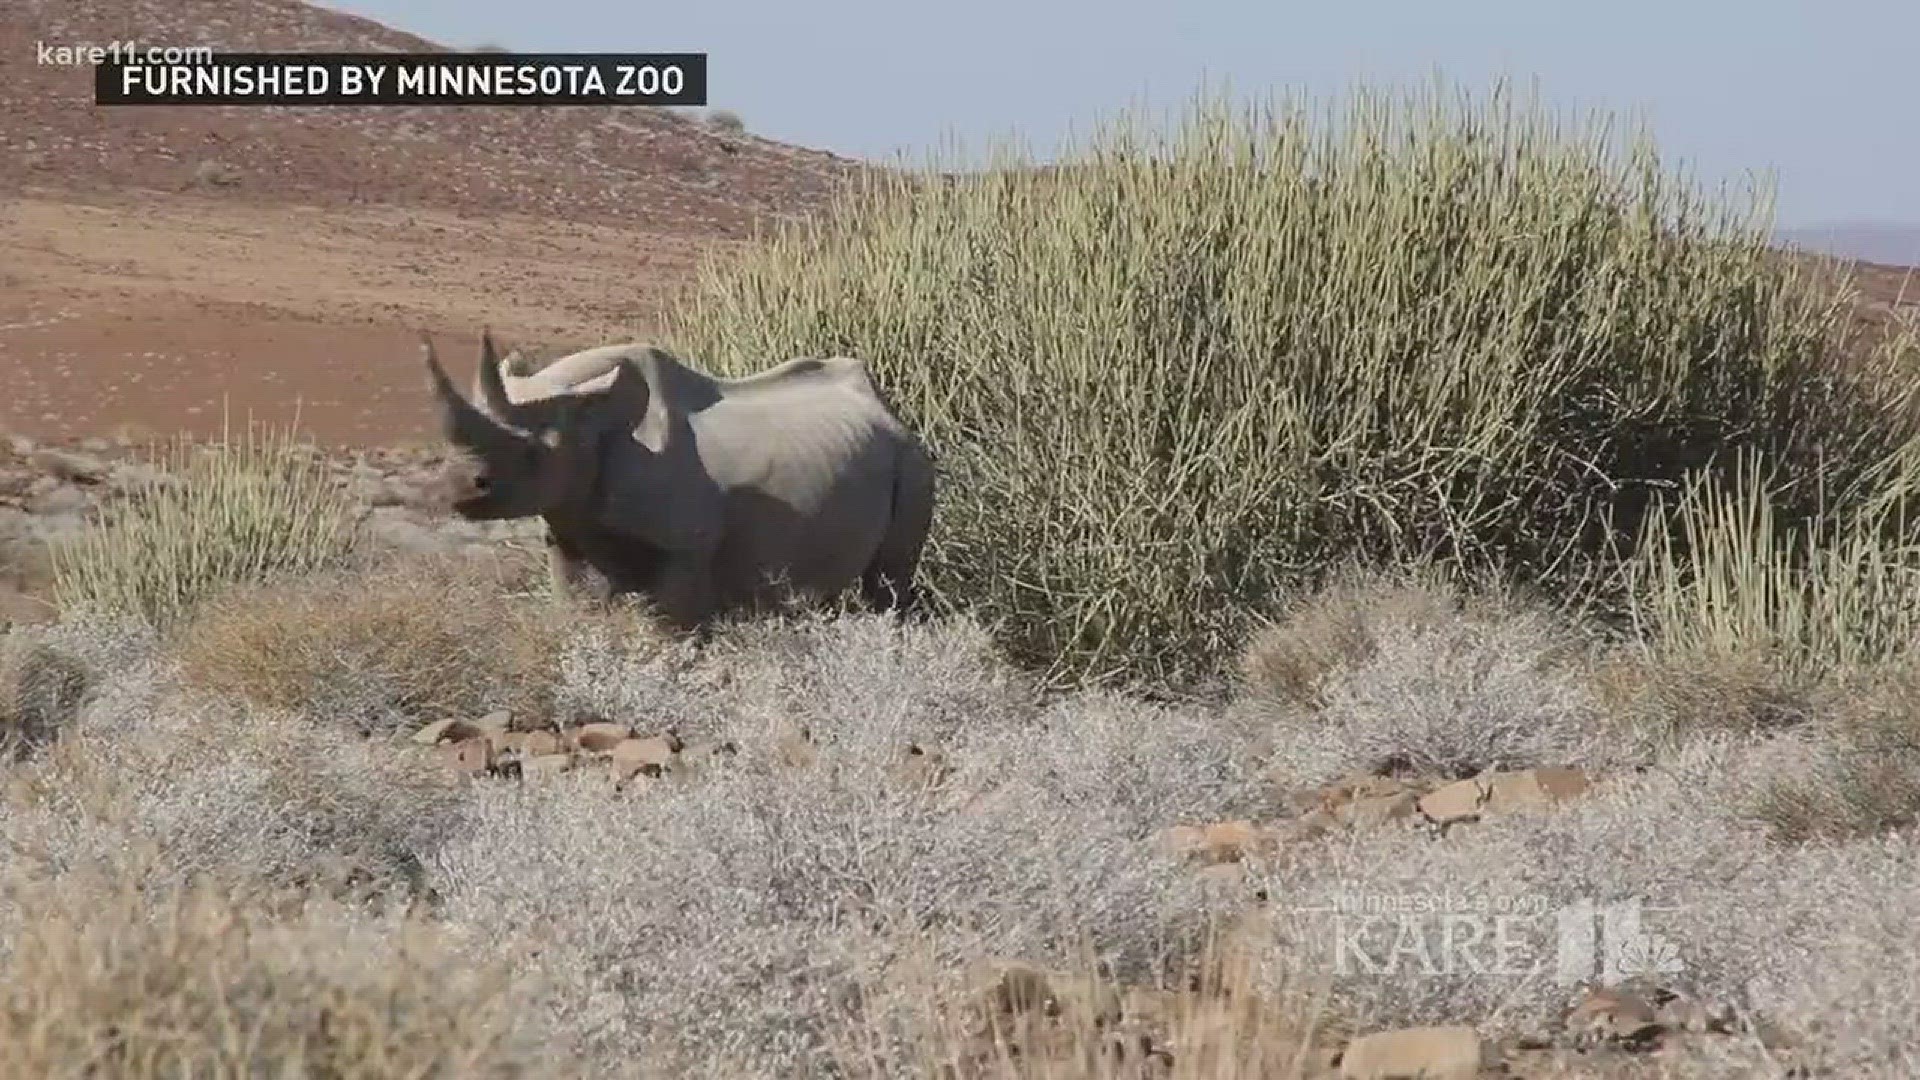 Jeff Muntefering of the Minnesota Zoo says a severe drought, along with poaching, is contributing to the loss of black rhinos in Namibia. http://kare11.tv/2nedoTR